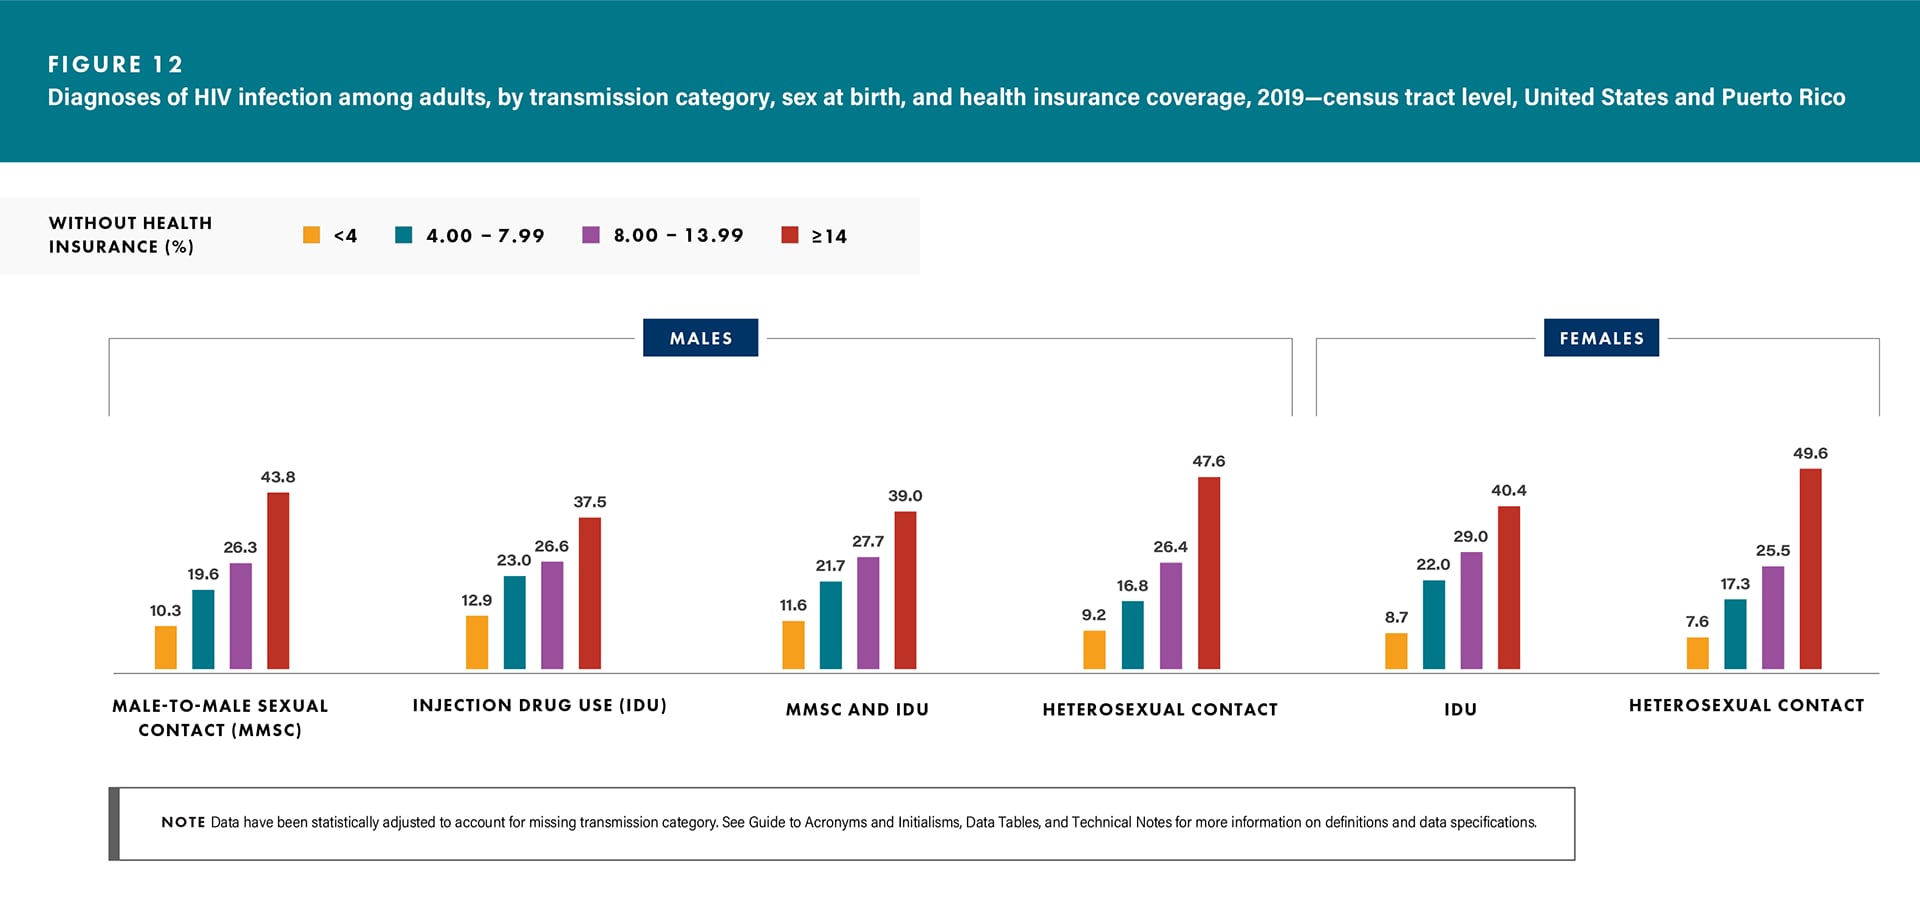 In 2019, adults who lived in census tracts with the lowest health insurance or health coverage plan (hereafter referred to as health insurance coverage) (where 14 percent or more of the residents did not have health insurance coverage) accounted for the highest HIV diagnosis rates for all transmission categories for both sexes.